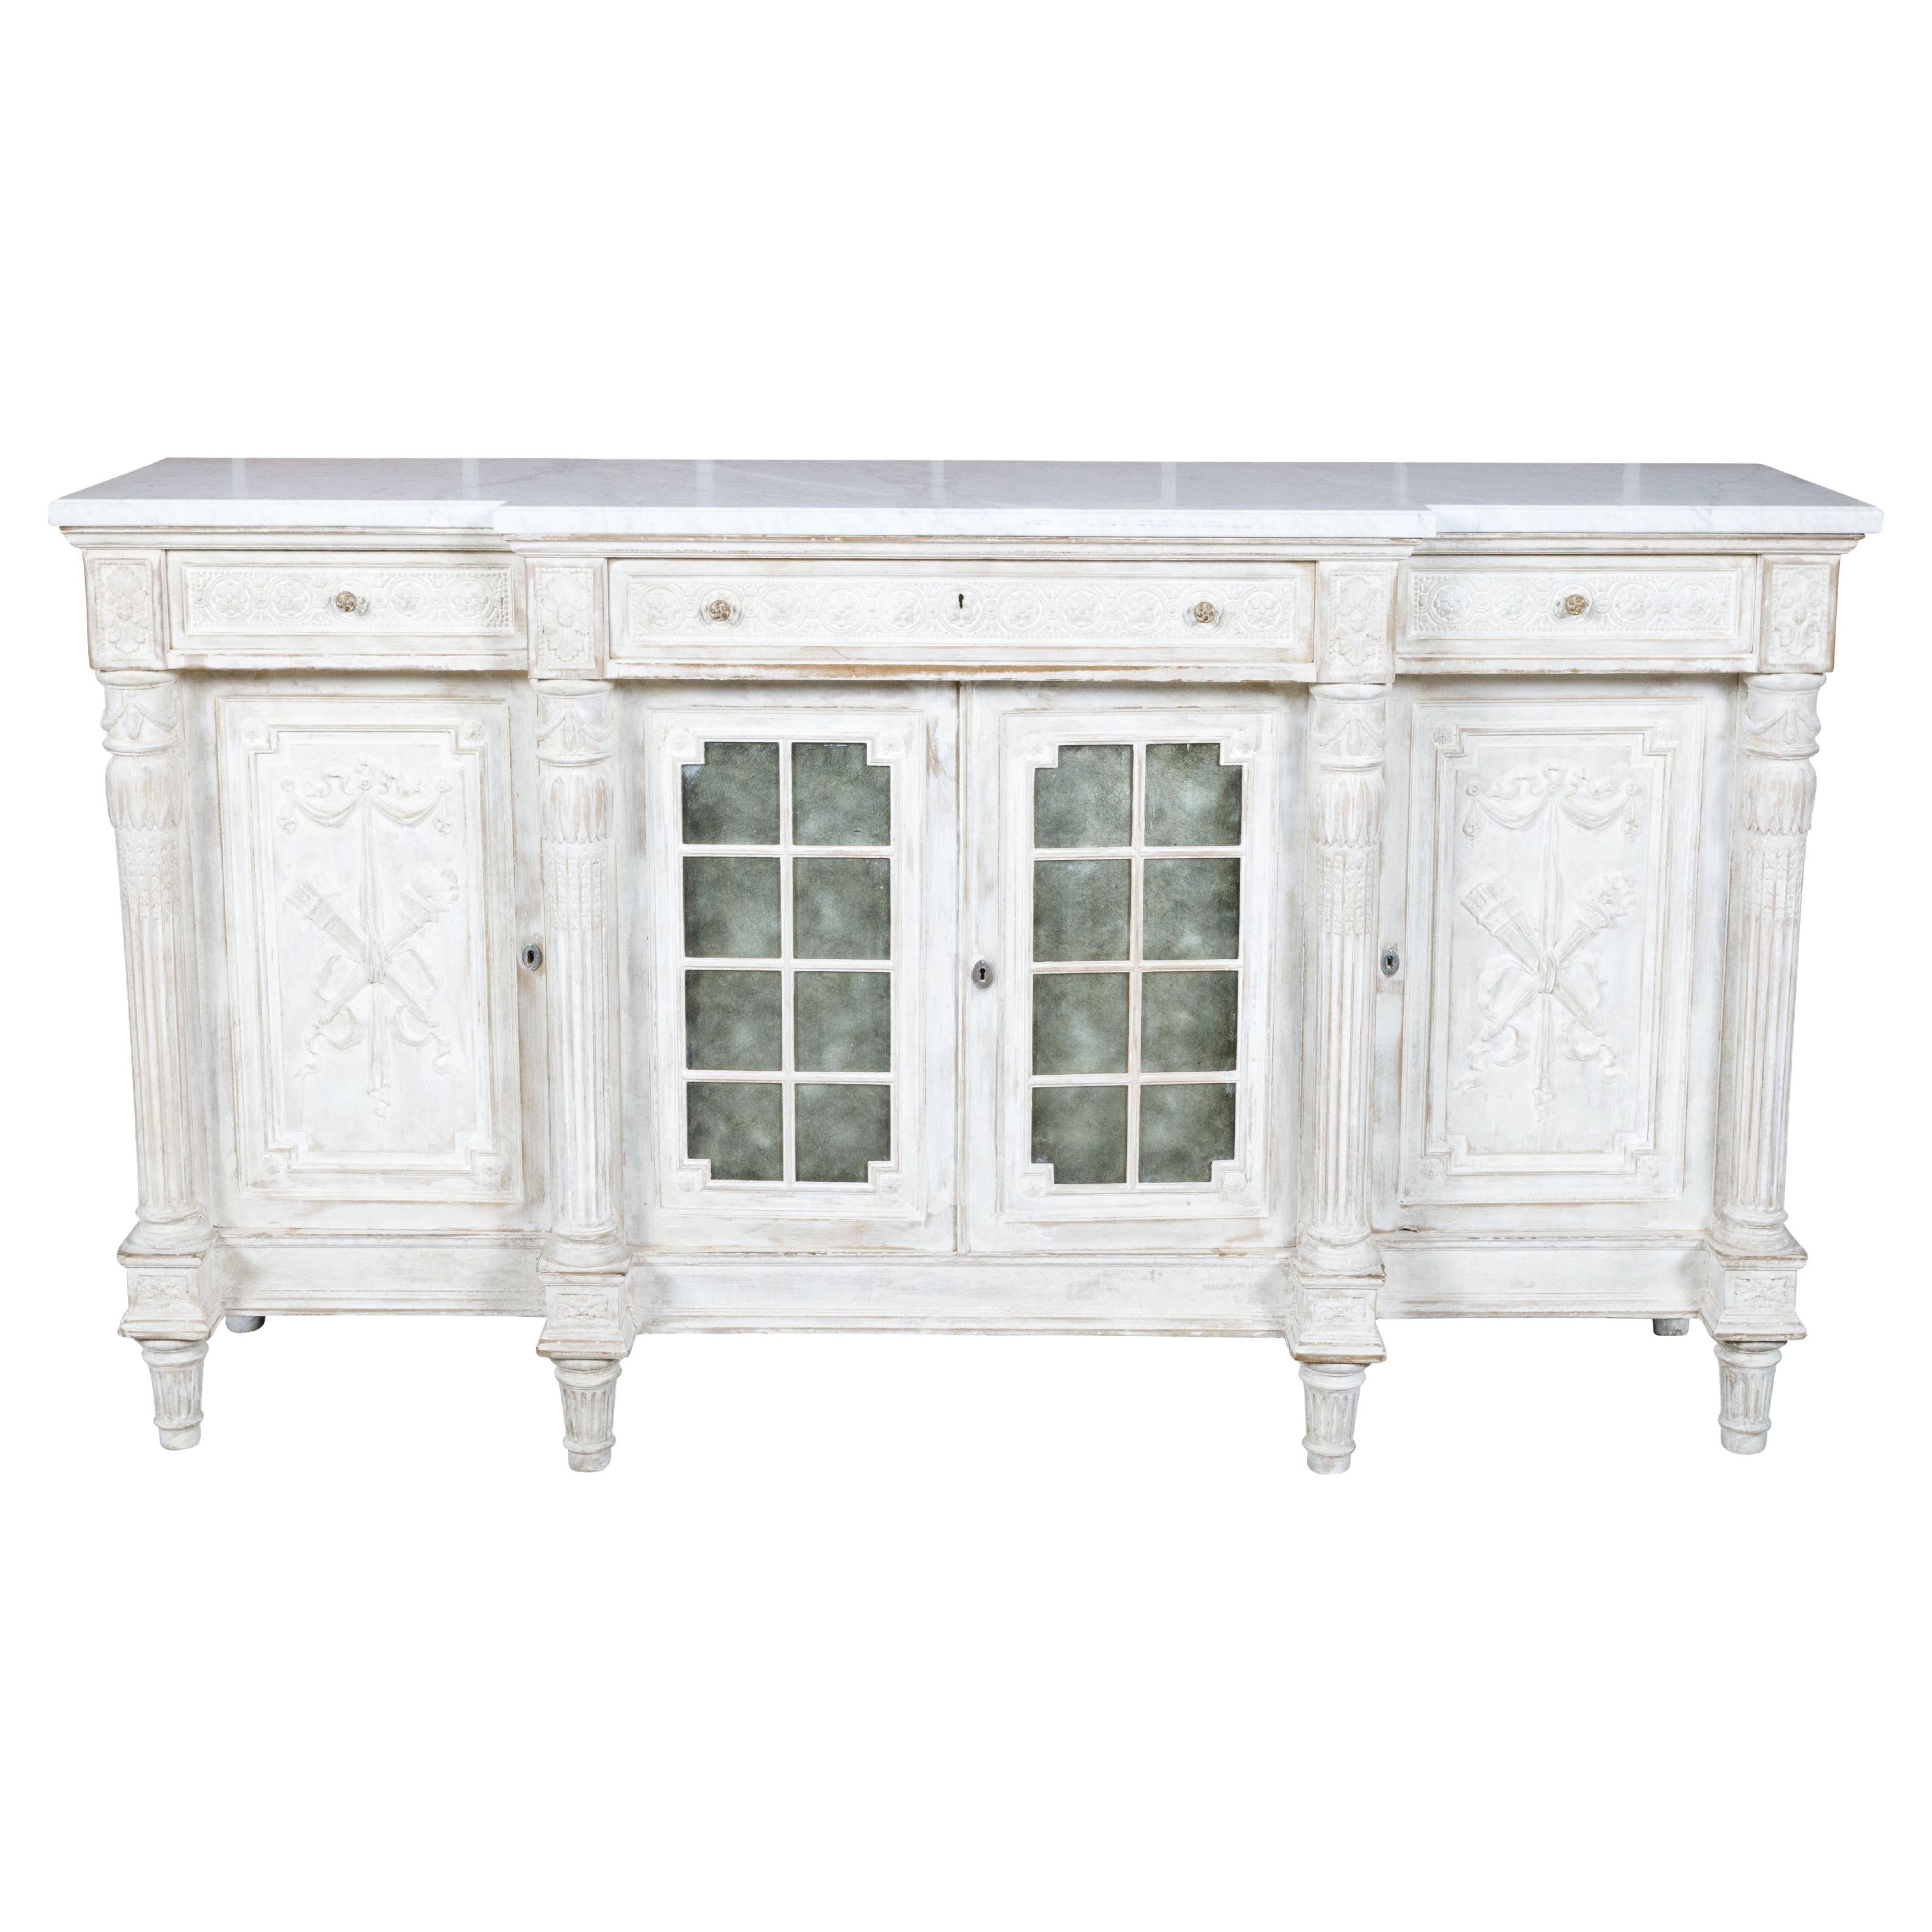 19th Century French Painted and Carved Wooden Buffet with White Marble Top For Sale